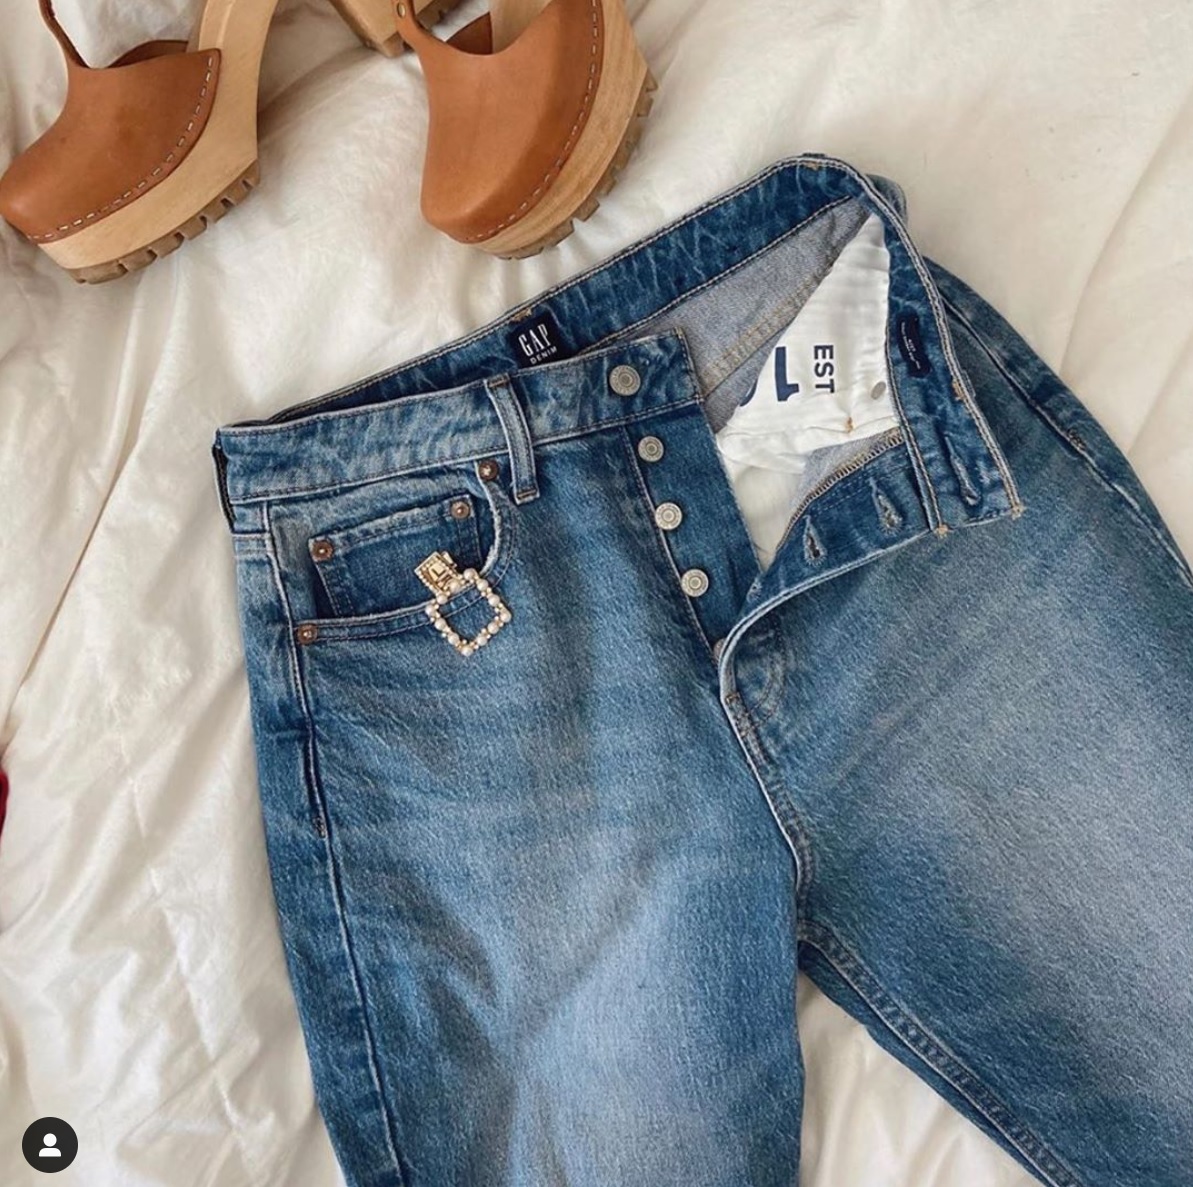 Gap Canada Deals: Save 50% OFF Jeans + 40% OFF Everything - Canadian ...